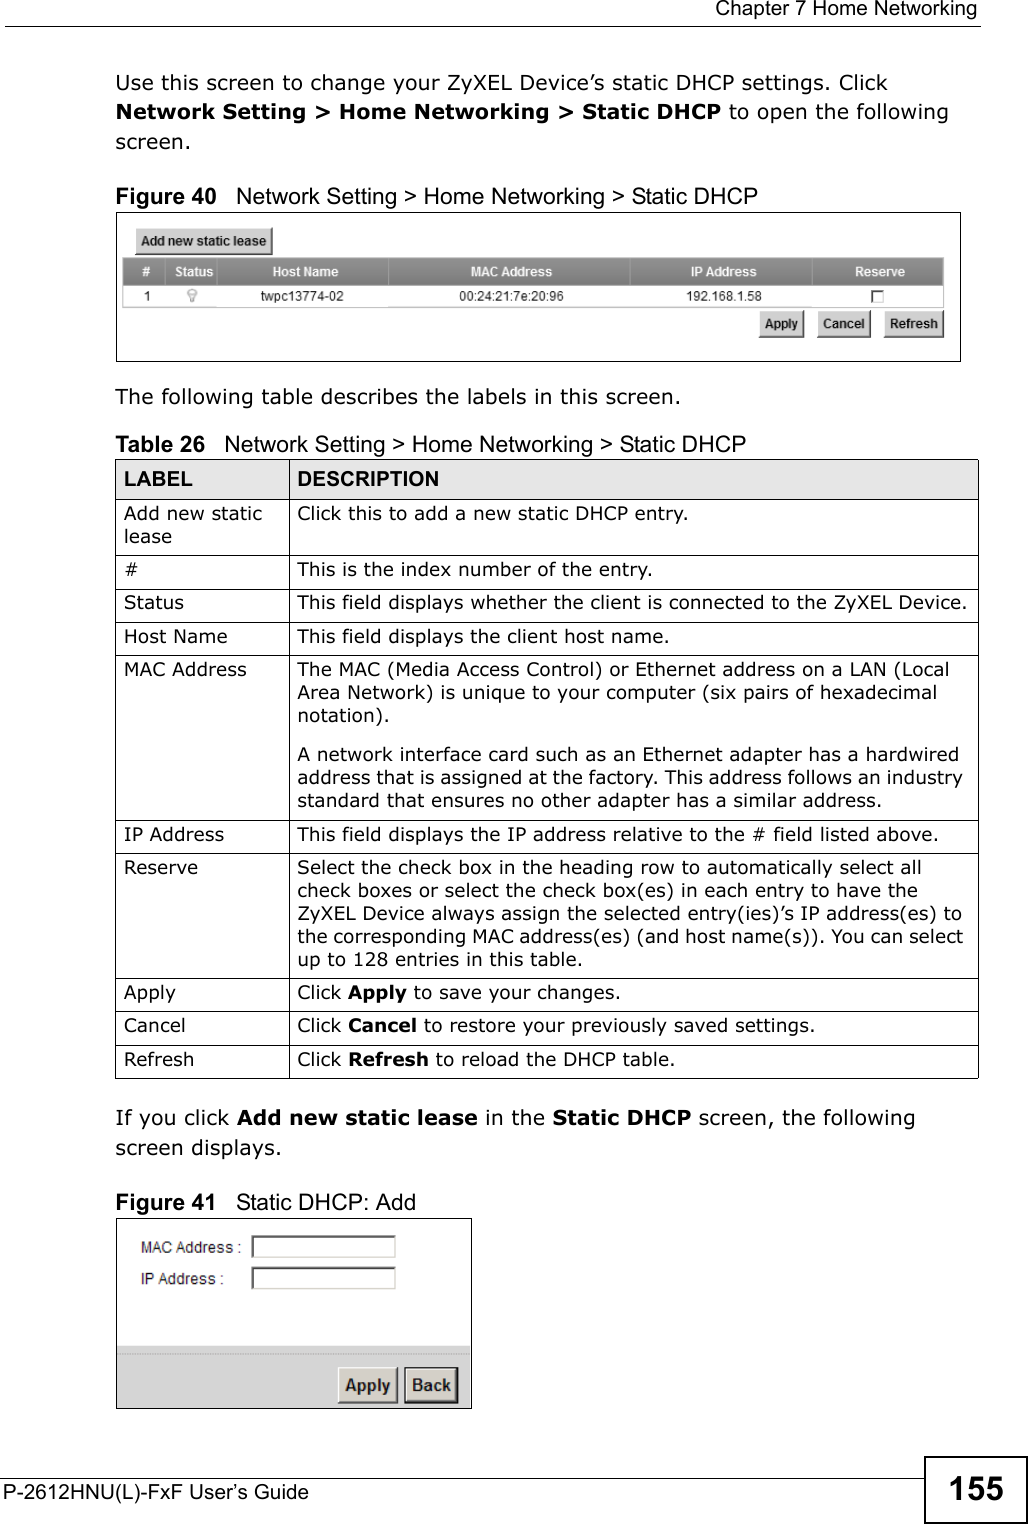  Chapter 7 Home NetworkingP-2612HNU(L)-FxF User’s Guide 155Use this screen to change your ZyXEL Device’s static DHCP settings. Click Network Setting &gt; Home Networking &gt; Static DHCP to open the following screen.Figure 40   Network Setting &gt; Home Networking &gt; Static DHCP The following table describes the labels in this screen.If you click Add new static lease in the Static DHCP screen, the following screen displays.Figure 41   Static DHCP: AddTable 26   Network Setting &gt; Home Networking &gt; Static DHCPLABEL DESCRIPTIONAdd new static leaseClick this to add a new static DHCP entry.# This is the index number of the entry.Status This field displays whether the client is connected to the ZyXEL Device.Host Name This field displays the client host name.MAC Address The MAC (Media Access Control) or Ethernet address on a LAN (Local Area Network) is unique to your computer (six pairs of hexadecimal notation).A network interface card such as an Ethernet adapter has a hardwired address that is assigned at the factory. This address follows an industry standard that ensures no other adapter has a similar address.IP Address This field displays the IP address relative to the # field listed above.Reserve Select the check box in the heading row to automatically select all check boxes or select the check box(es) in each entry to have the ZyXEL Device always assign the selected entry(ies)’s IP address(es) to the corresponding MAC address(es) (and host name(s)). You can select up to 128 entries in this table.  Apply Click Apply to save your changes.Cancel Click Cancel to restore your previously saved settings.Refresh Click Refresh to reload the DHCP table.